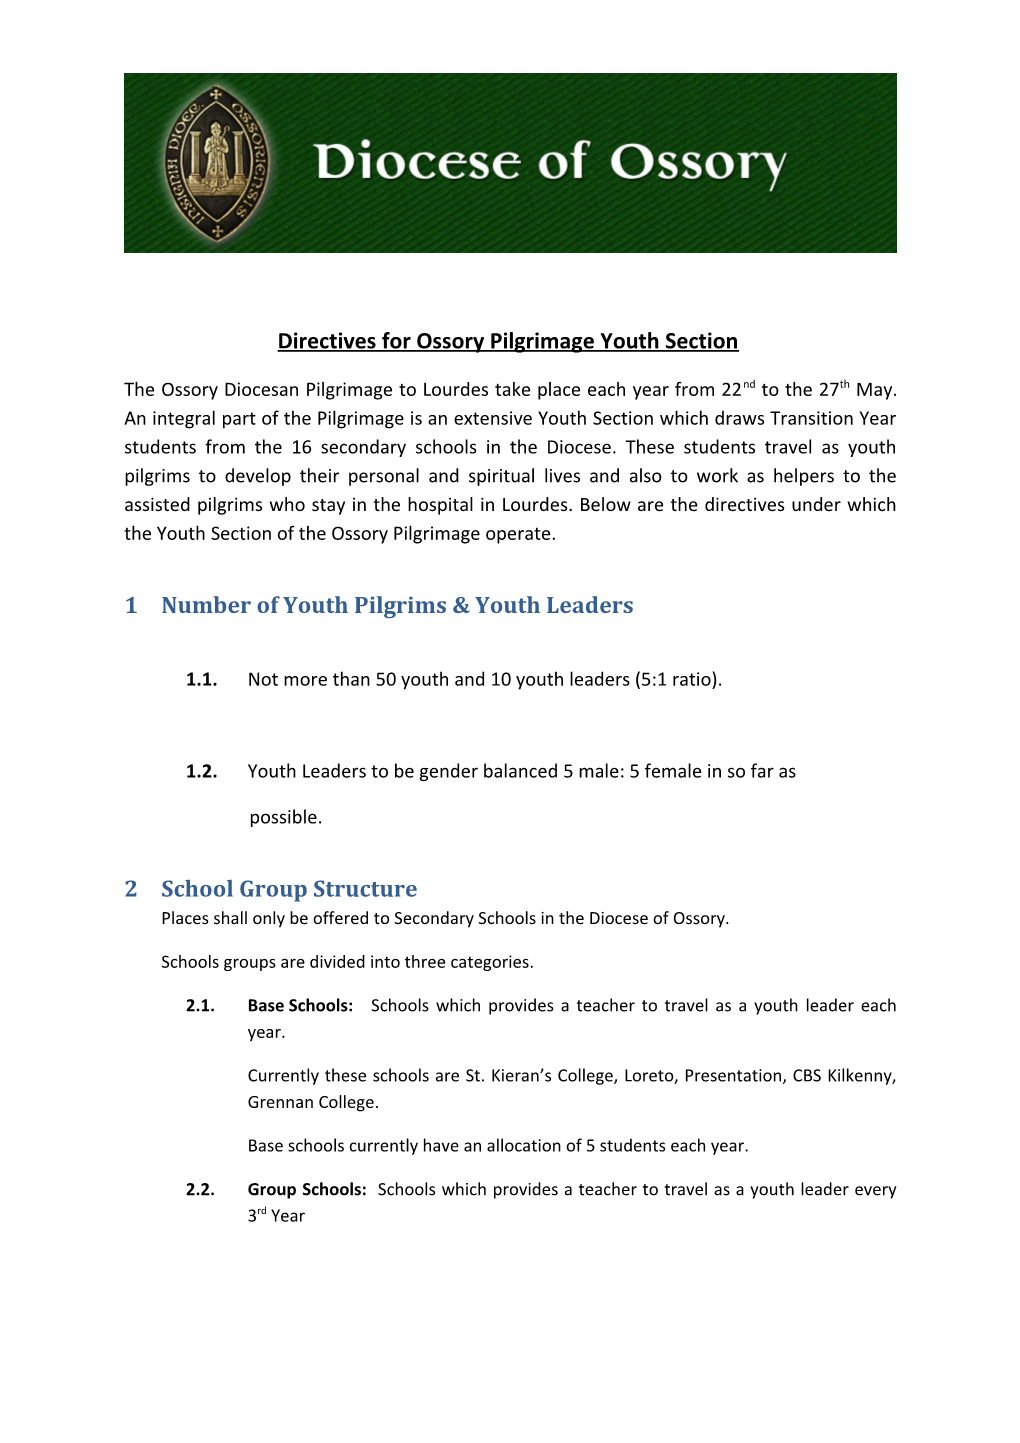 Directives for Ossory Pilgrimage Youth Section